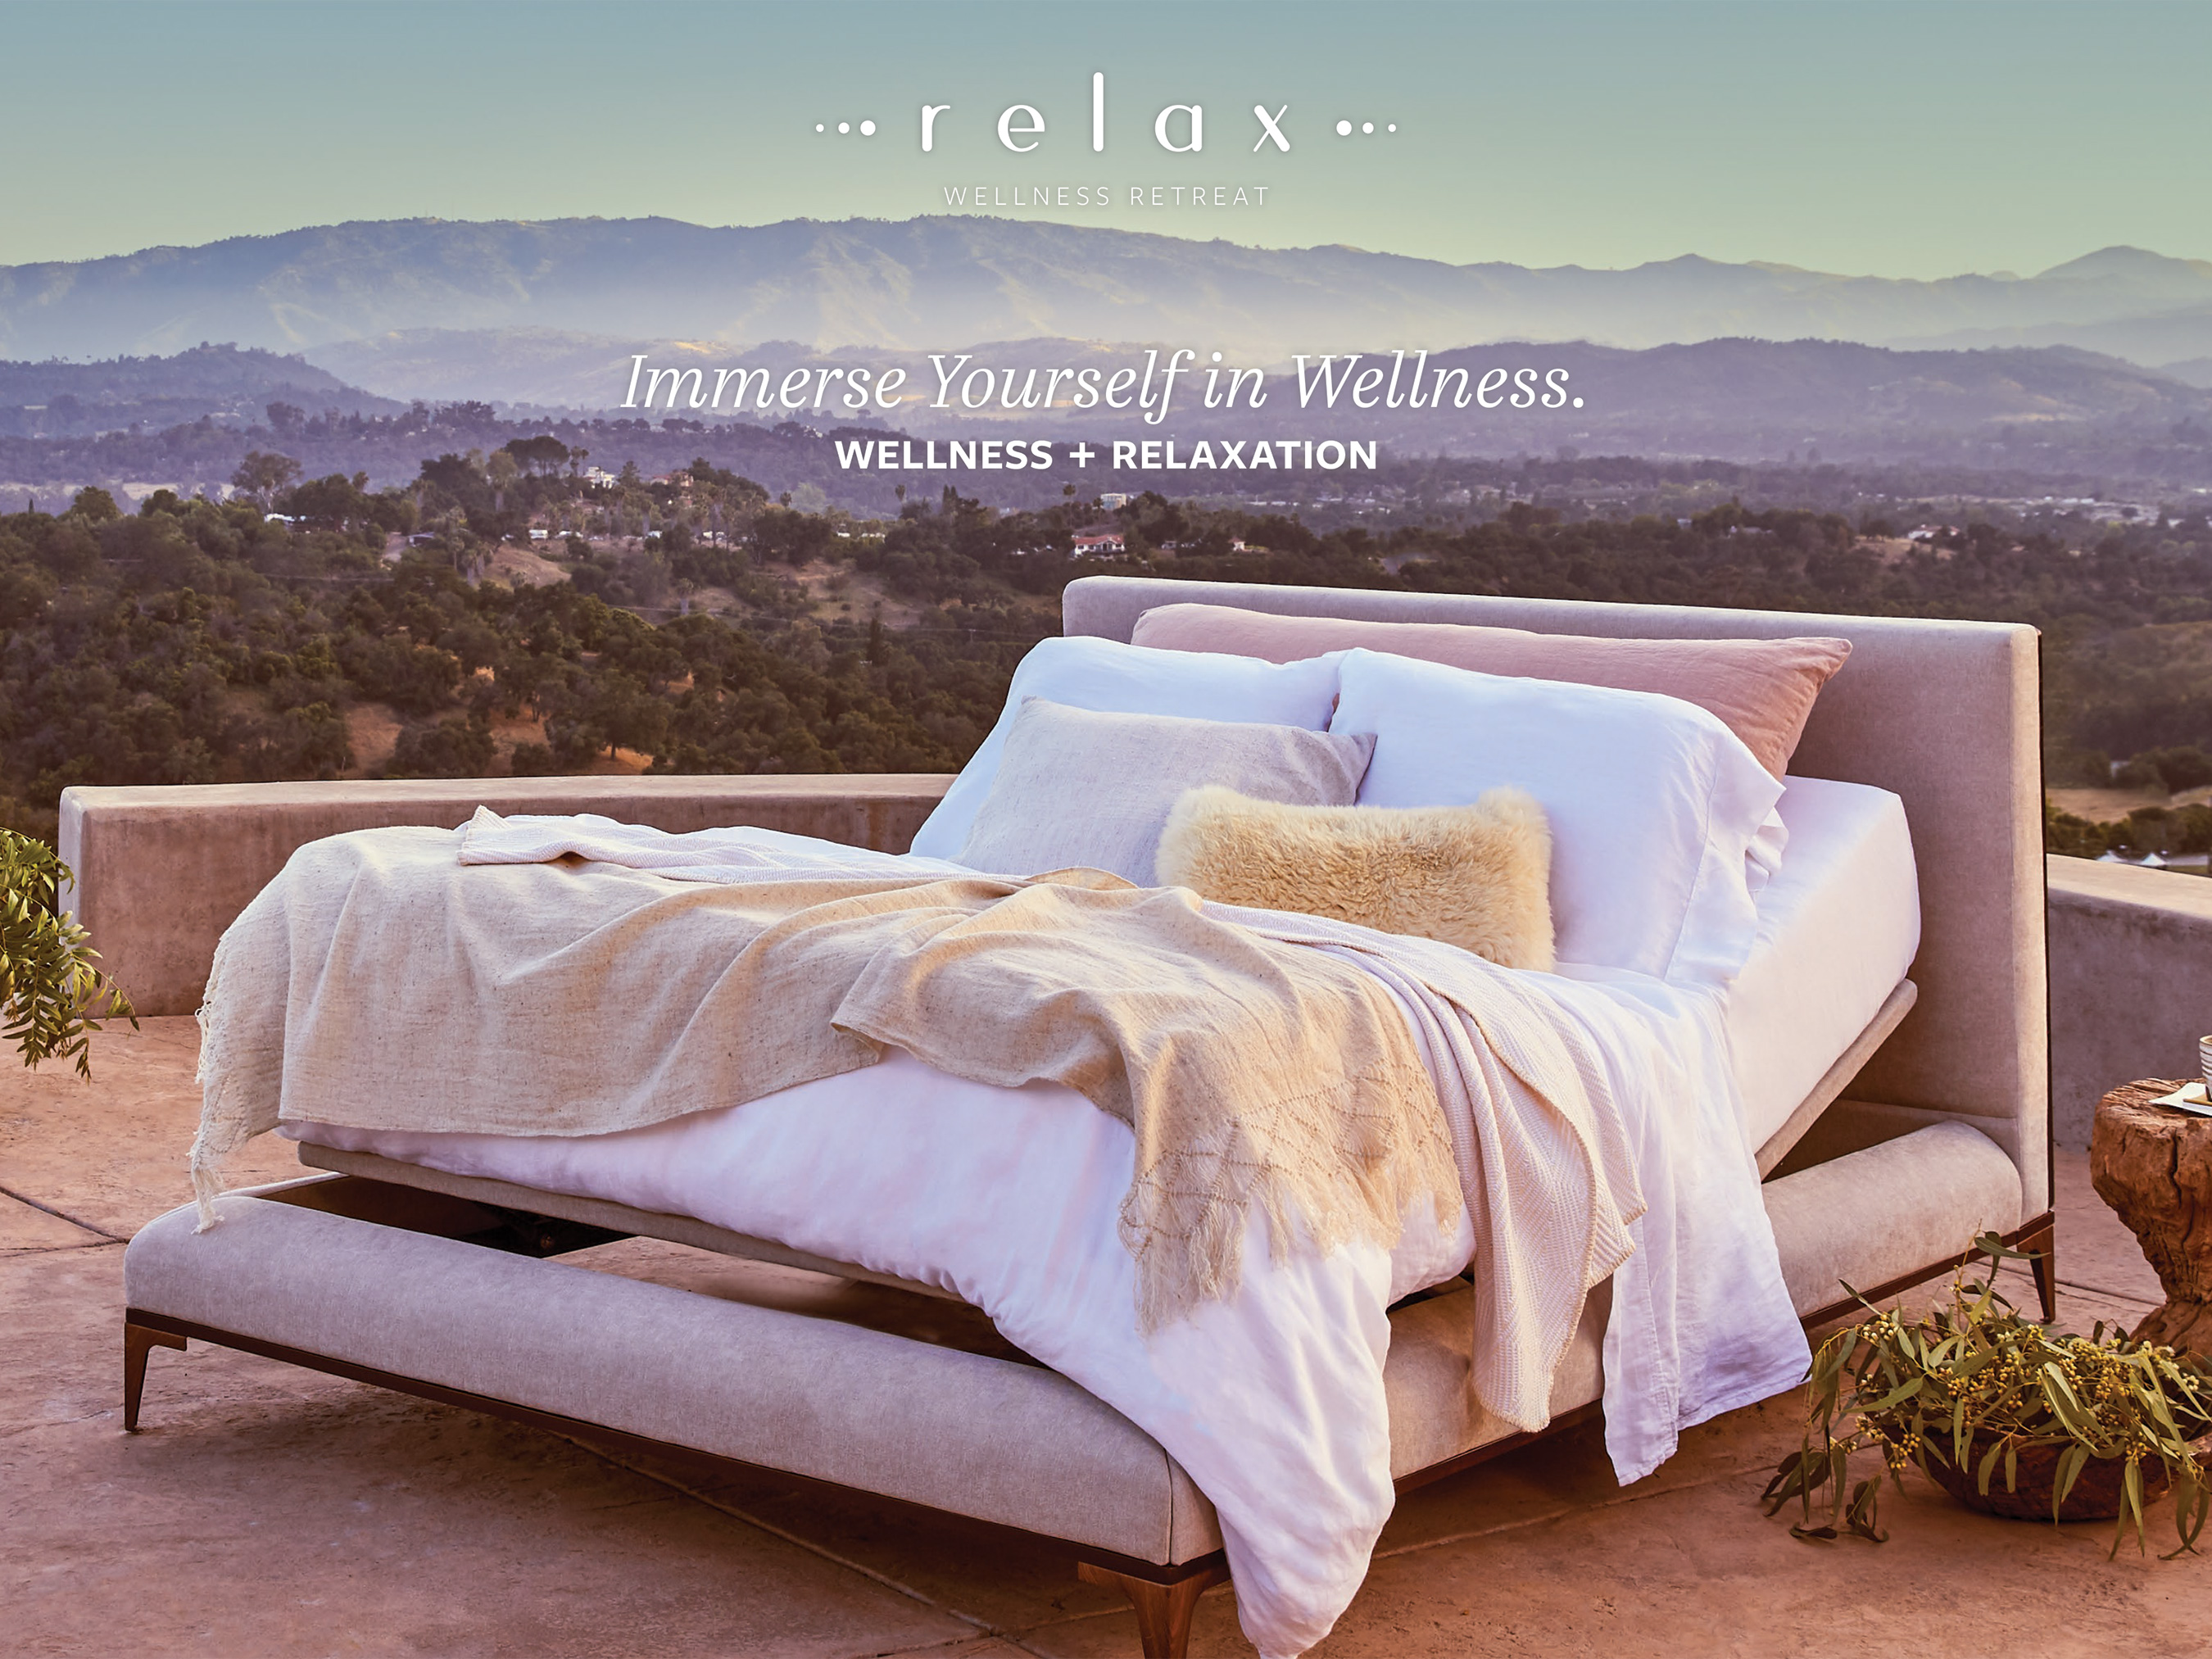 Wellness Retreat, a reinterpretation of the adjustable base category, that soothes the body, refreshes the mind, and rejuvenates the spirit.